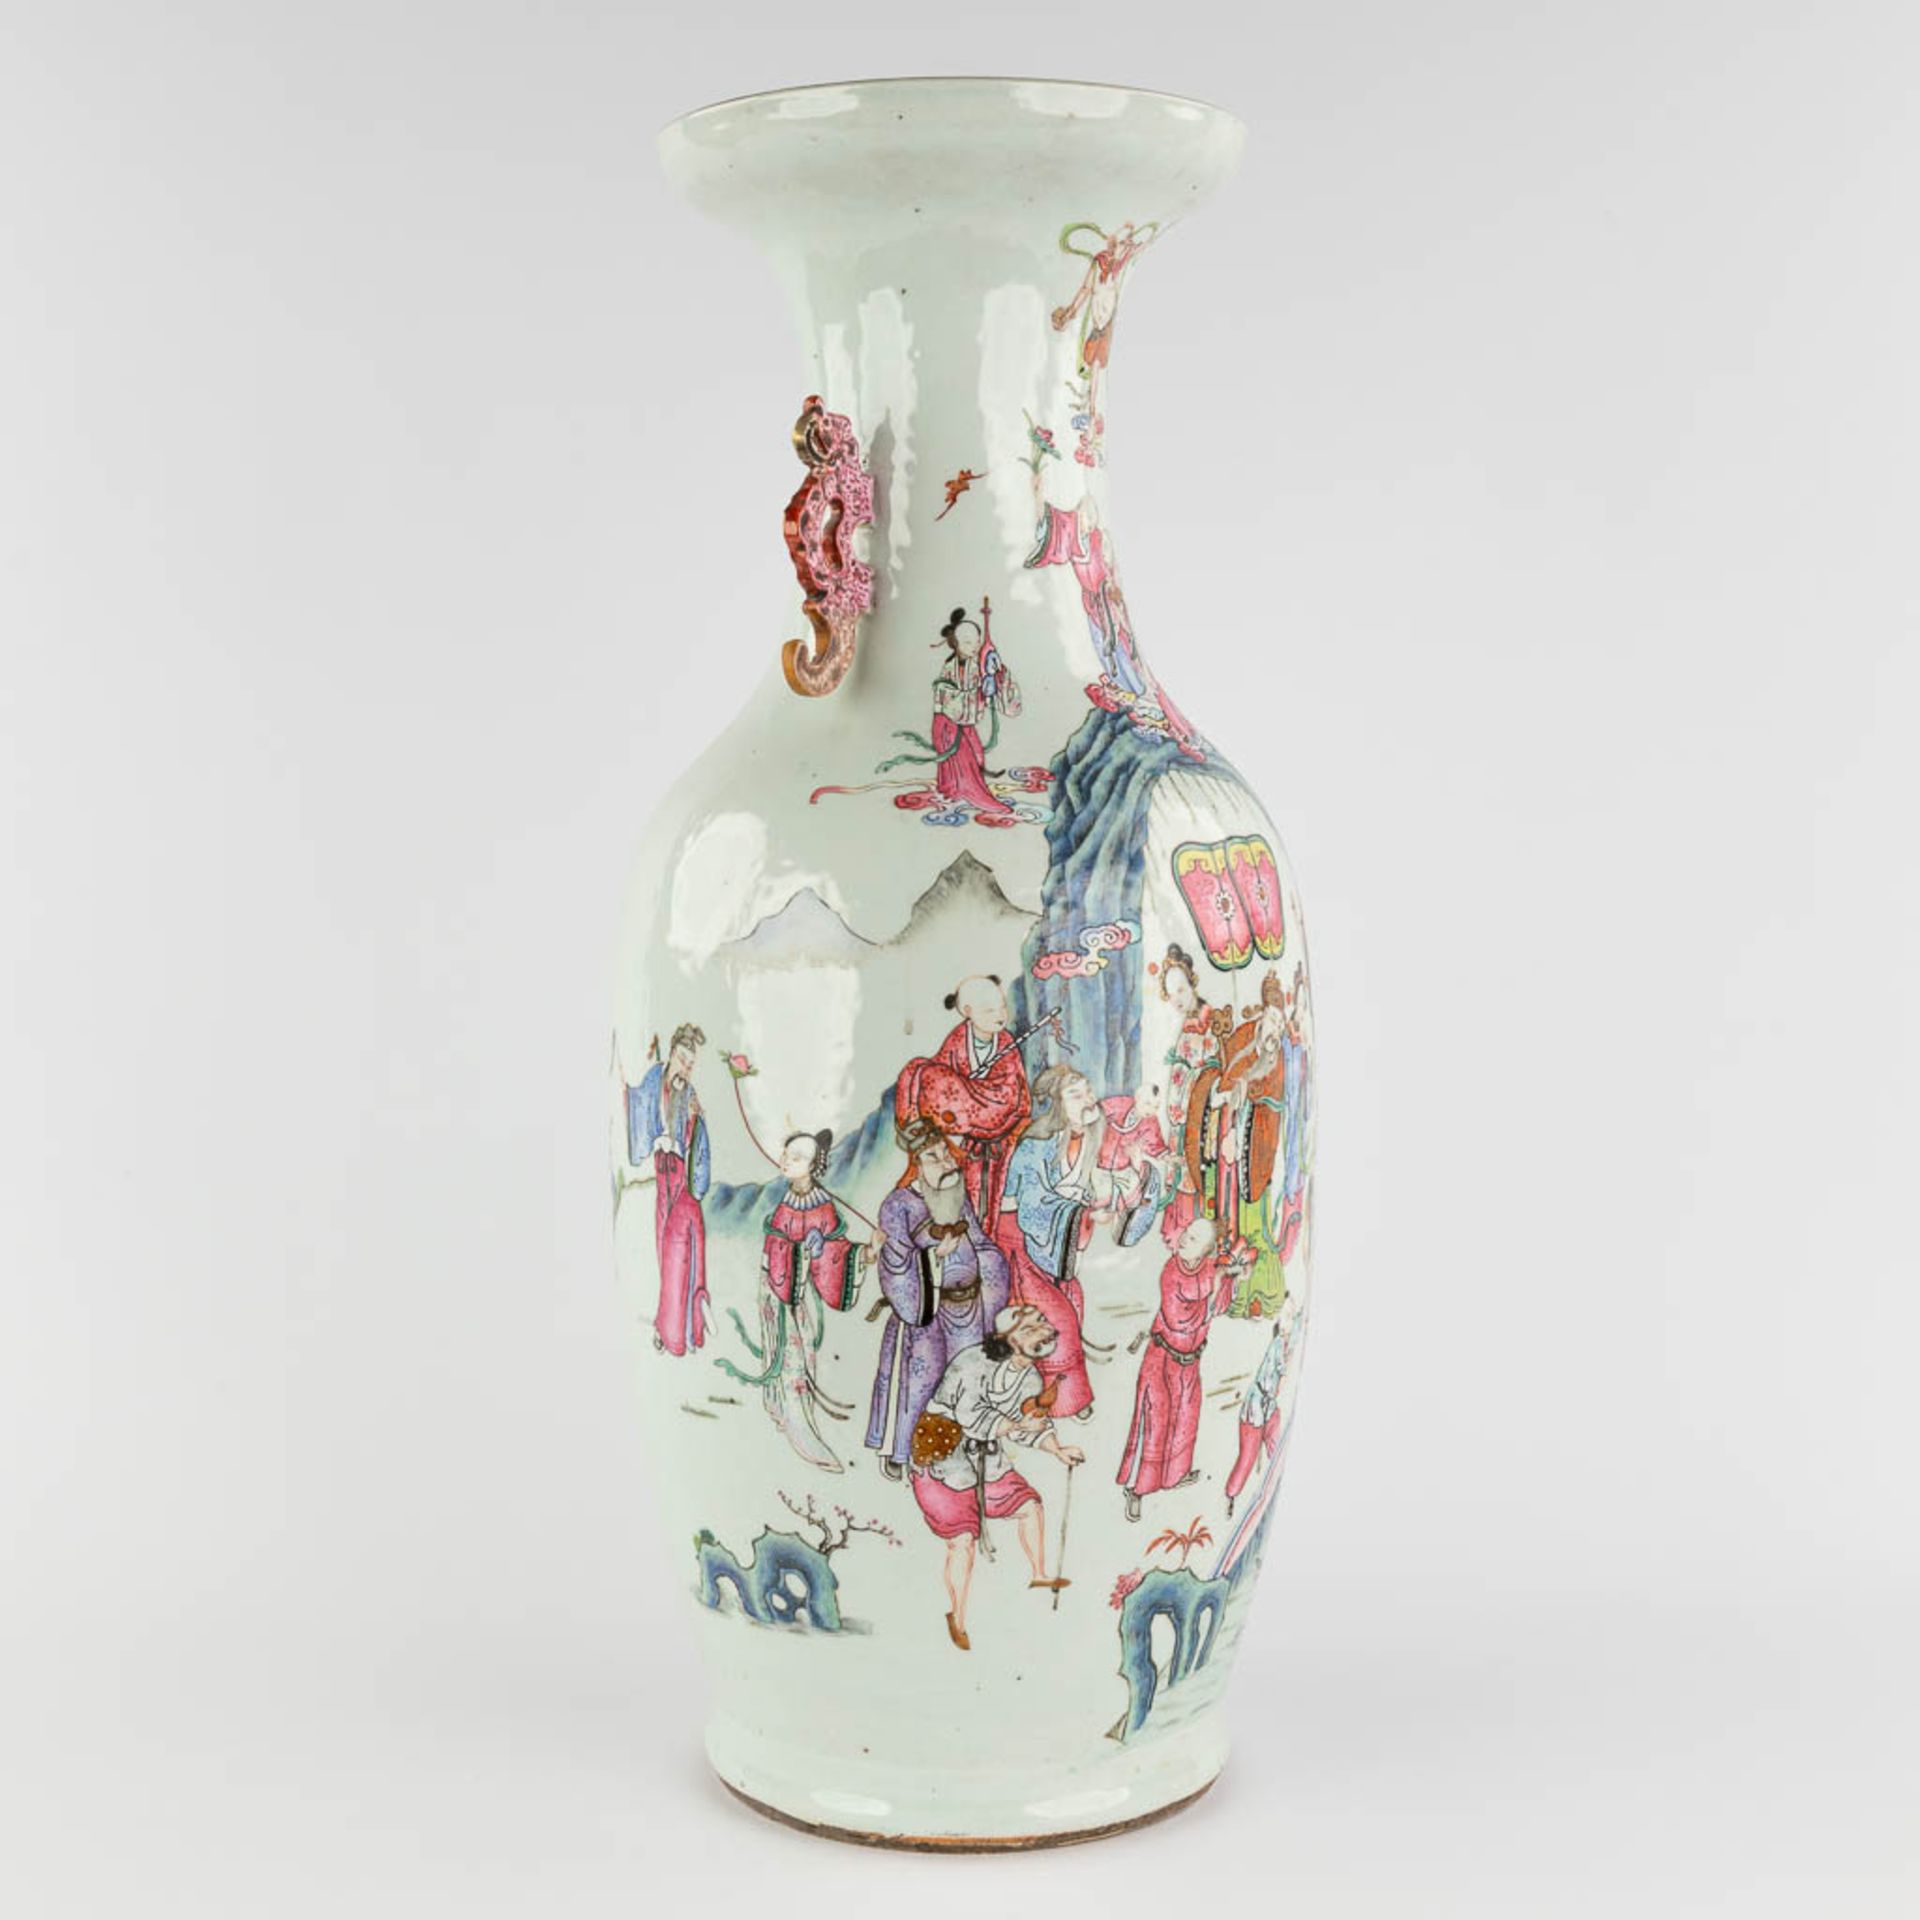 A Chinese Famille Rose vase, decorated with Wise men and items of good fortune. 19th C. (H:60 x D:25 - Image 3 of 18